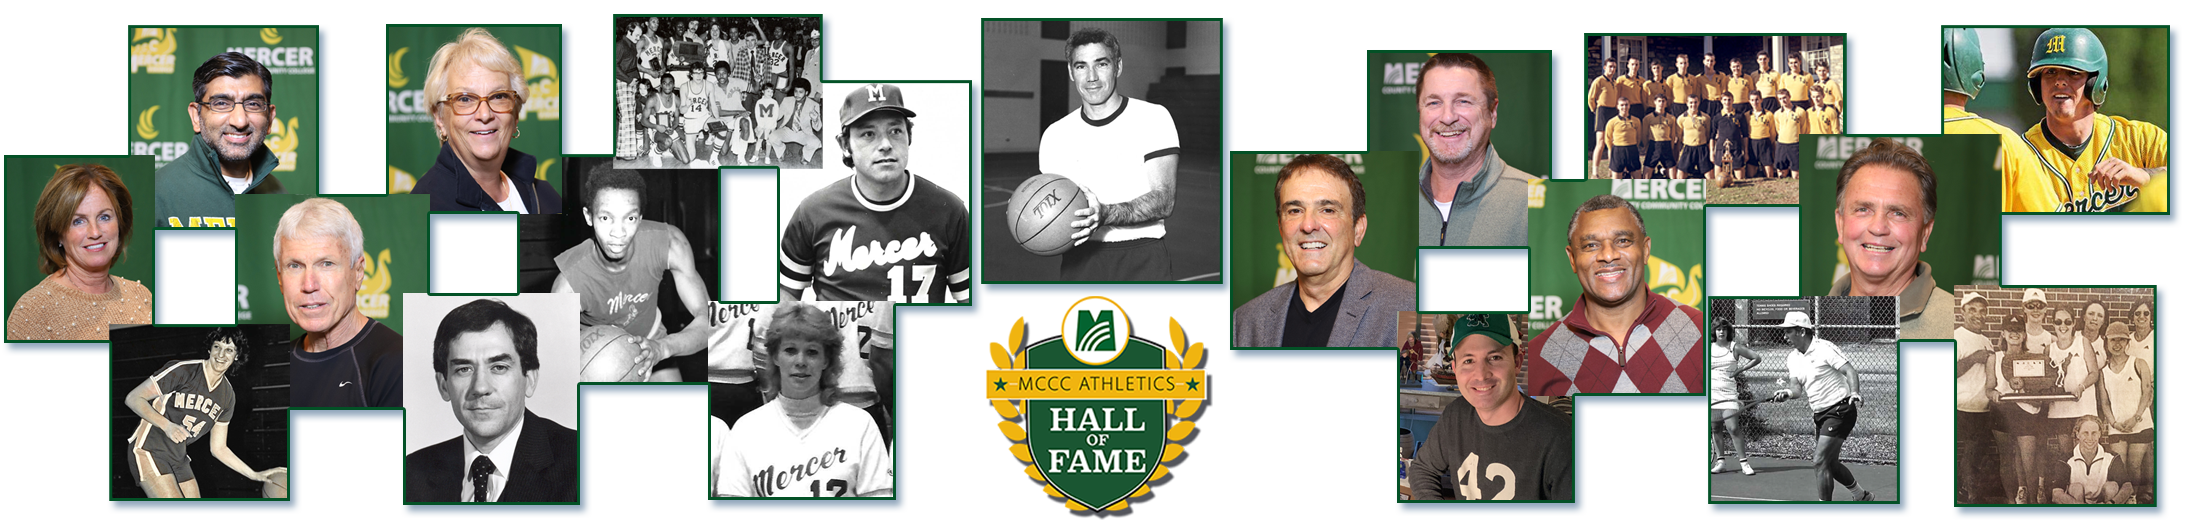 MCCC Athletics Hall of Fame Class of 2021